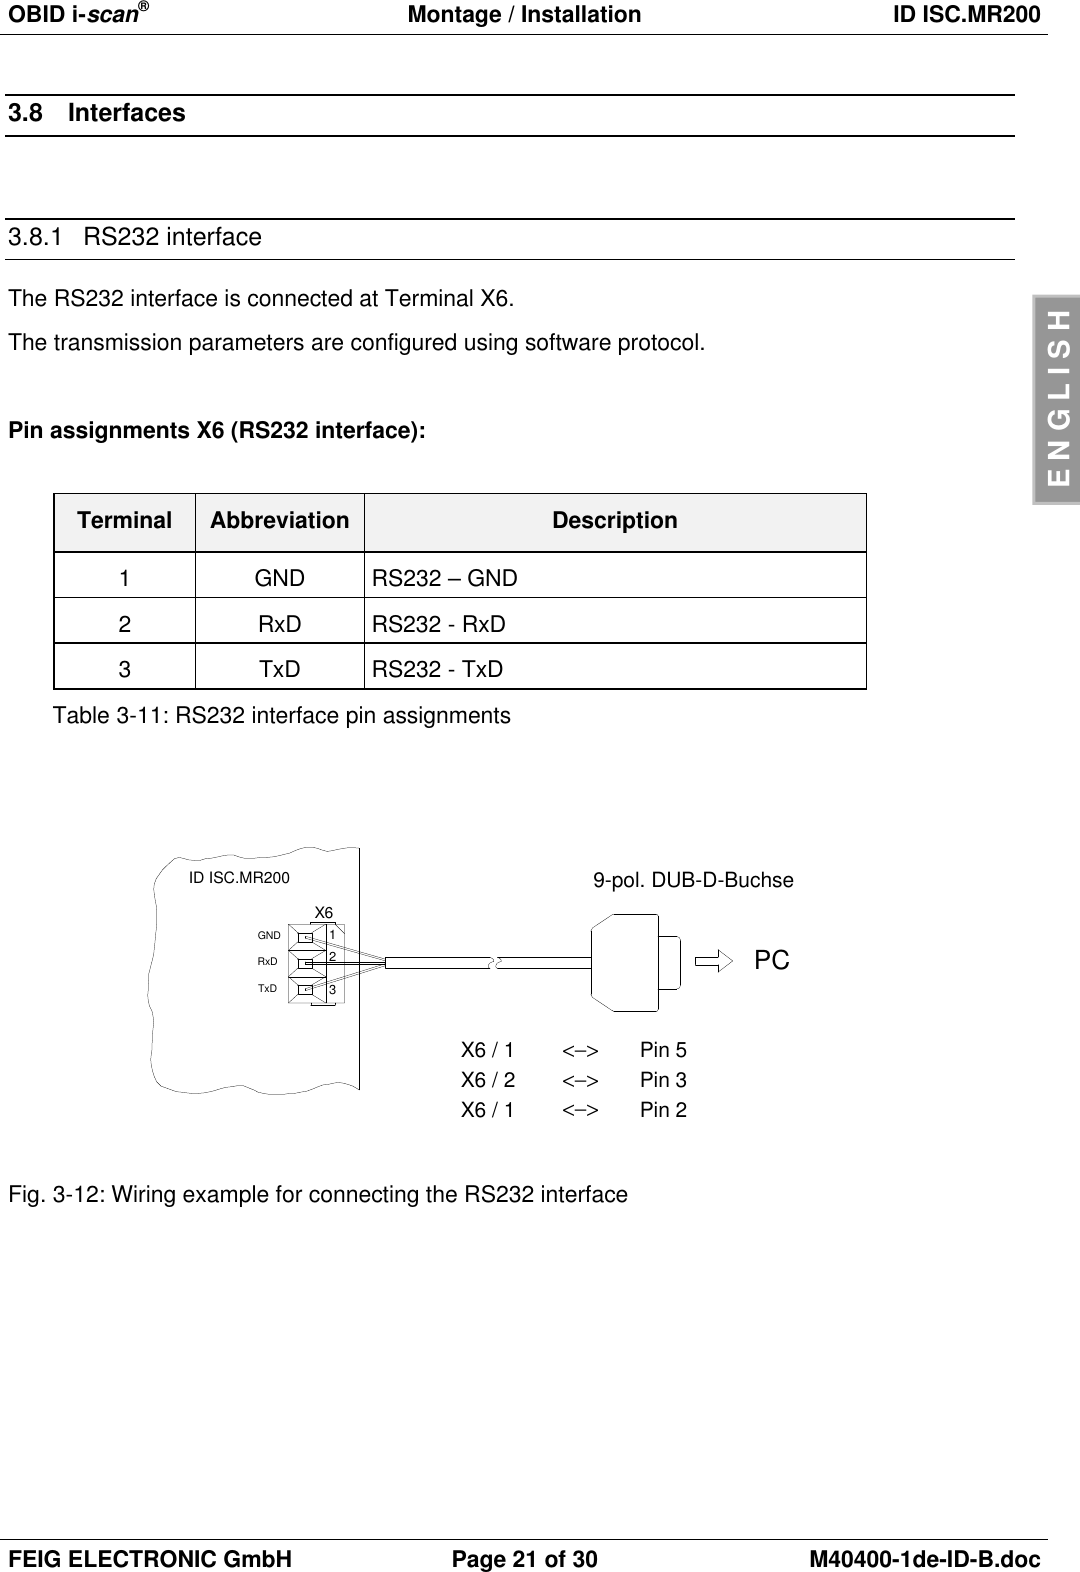 OBID i-scan®Montage / Installation ID ISC.MR200FEIG ELECTRONIC GmbH Page 21 of 30 M40400-1de-ID-B.docENGLISH3.8 Interfaces3.8.1 RS232 interfaceThe RS232 interface is connected at Terminal X6.The transmission parameters are configured using software protocol.Pin assignments X6 (RS232 interface):Terminal Abbreviation Description1GND RS232 – GND2RxD RS232 - RxD3TxD RS232 - TxDTable 3-11: RS232 interface pin assignmentsFig. 3-12: Wiring example for connecting the RS232 interfacePC&lt;−&gt;&lt;−&gt;&lt;−&gt;9-pol. DUB-D-BuchseTxDRxDGNDID ISC.MR200X6321X6 / 1 Pin 5Pin 3Pin 2X6 / 2X6 / 1